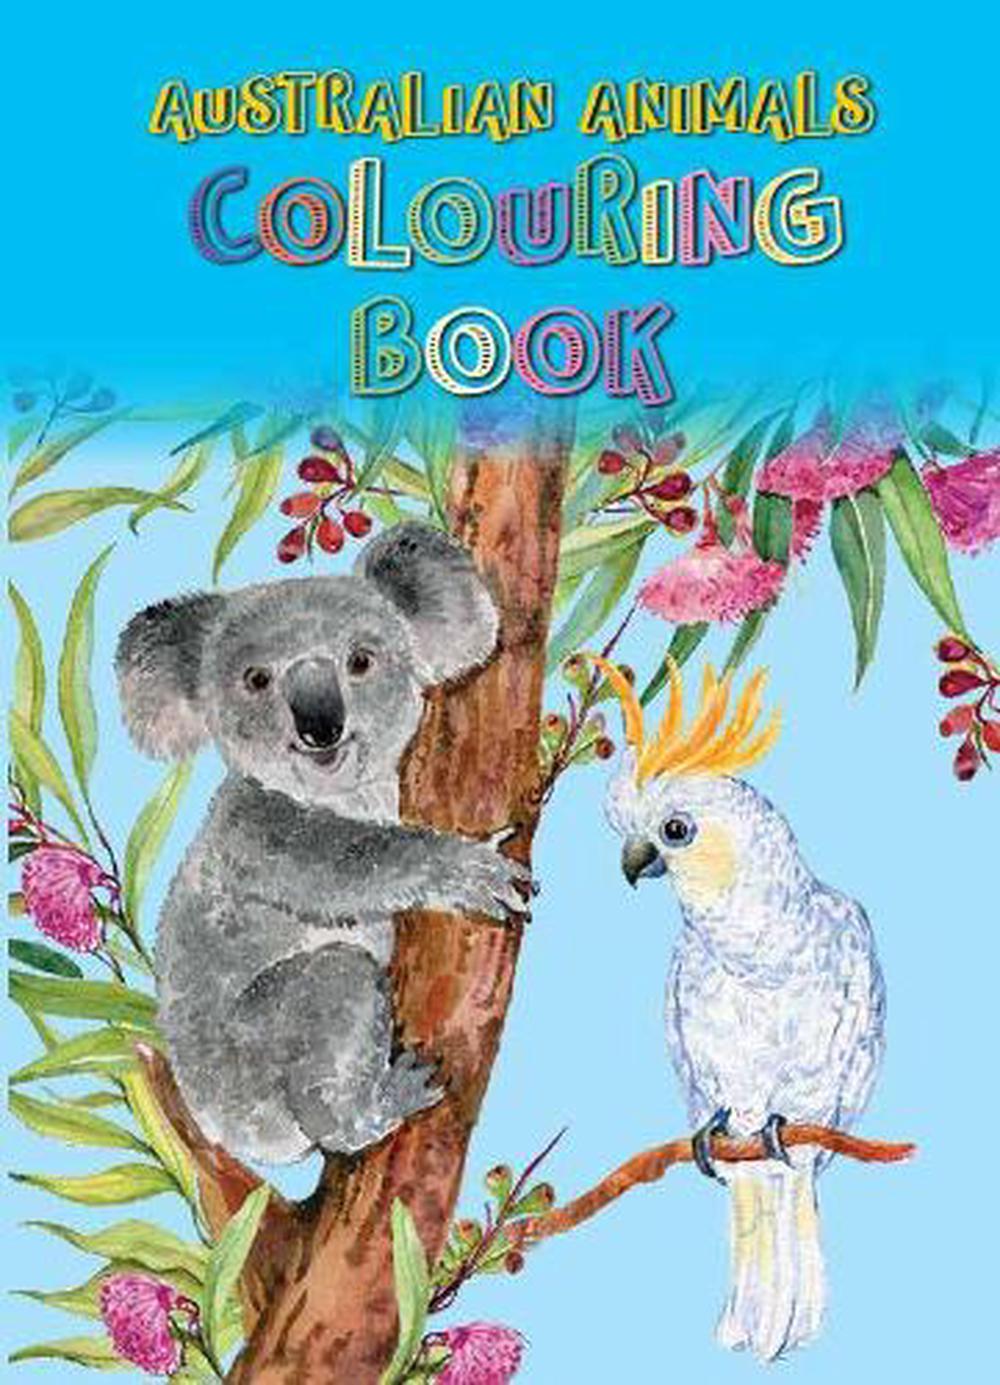 Download Australian Animals Colouring Book: Colouring Book by New ...